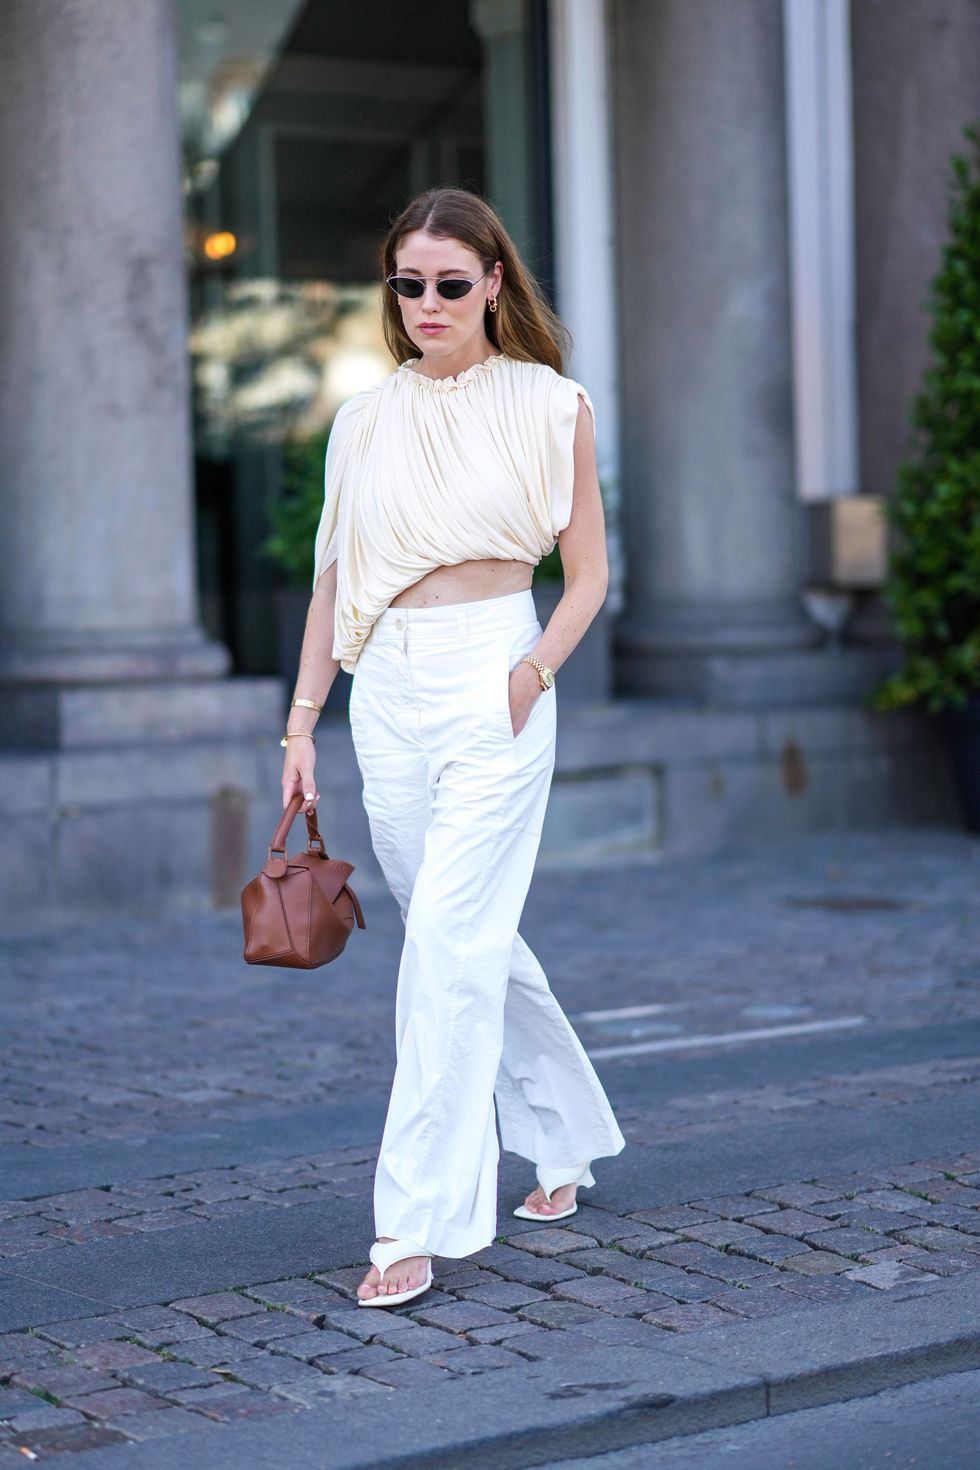 HOW TO STYLE WIDE LEG PANTS  CUTE SUMMER OUTFITS 